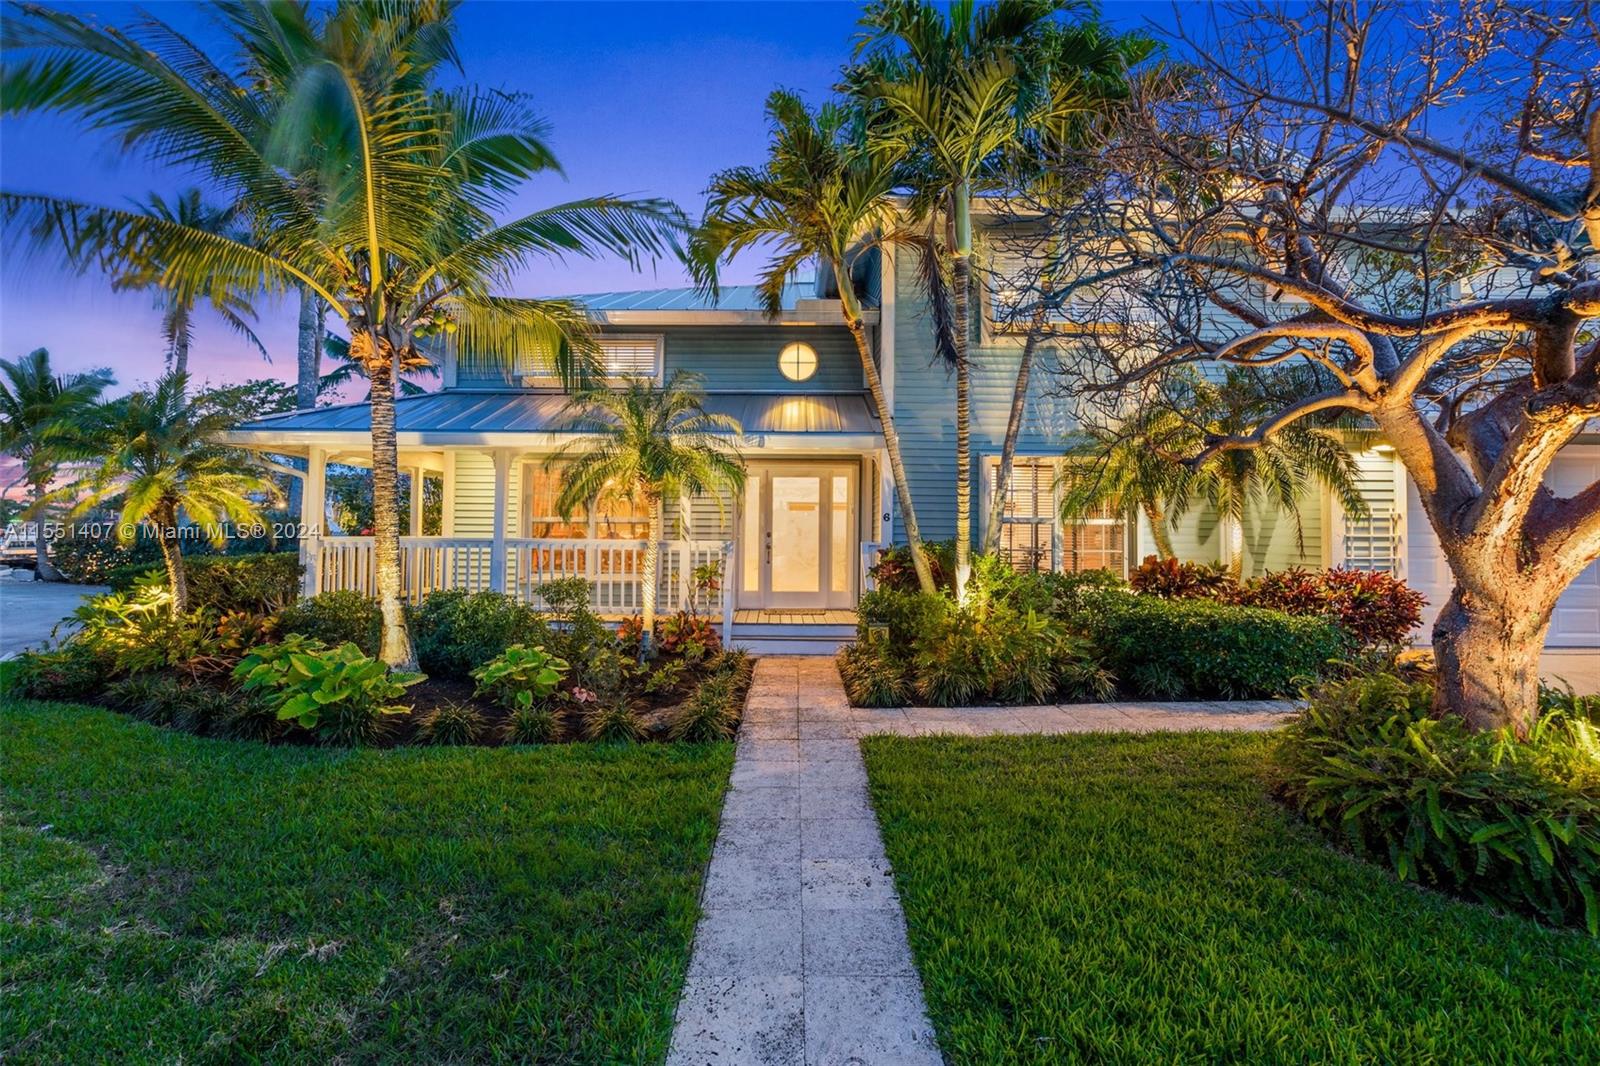 Stunning Key West style residence nestled along the tranquil waters of central Palm Beach County. Boasting 130 feet of waterfront & situated on a sprawling 1/3-acre lot, this home offers an unparalleled opportunity to embrace the ultimate coastal lifestyle. Soaring ceilings welcome you into a spacious floor plan & open kitchen offering subzero refrigerator & freezer, gas cooktop with downdraft ventilation, pot filler, large island with prep sink & built-in wine fridge. Enjoy aquatic adventures or relax in your own private oasis with large screened porch, bar, outdoor kitchen, pool & spa, waterfront fire pit, dock & boat lift. Additional features include new metal roof & 2 car garage. This prime location is on a private and quiet street right across the intracoastal from Ocean Ridge.